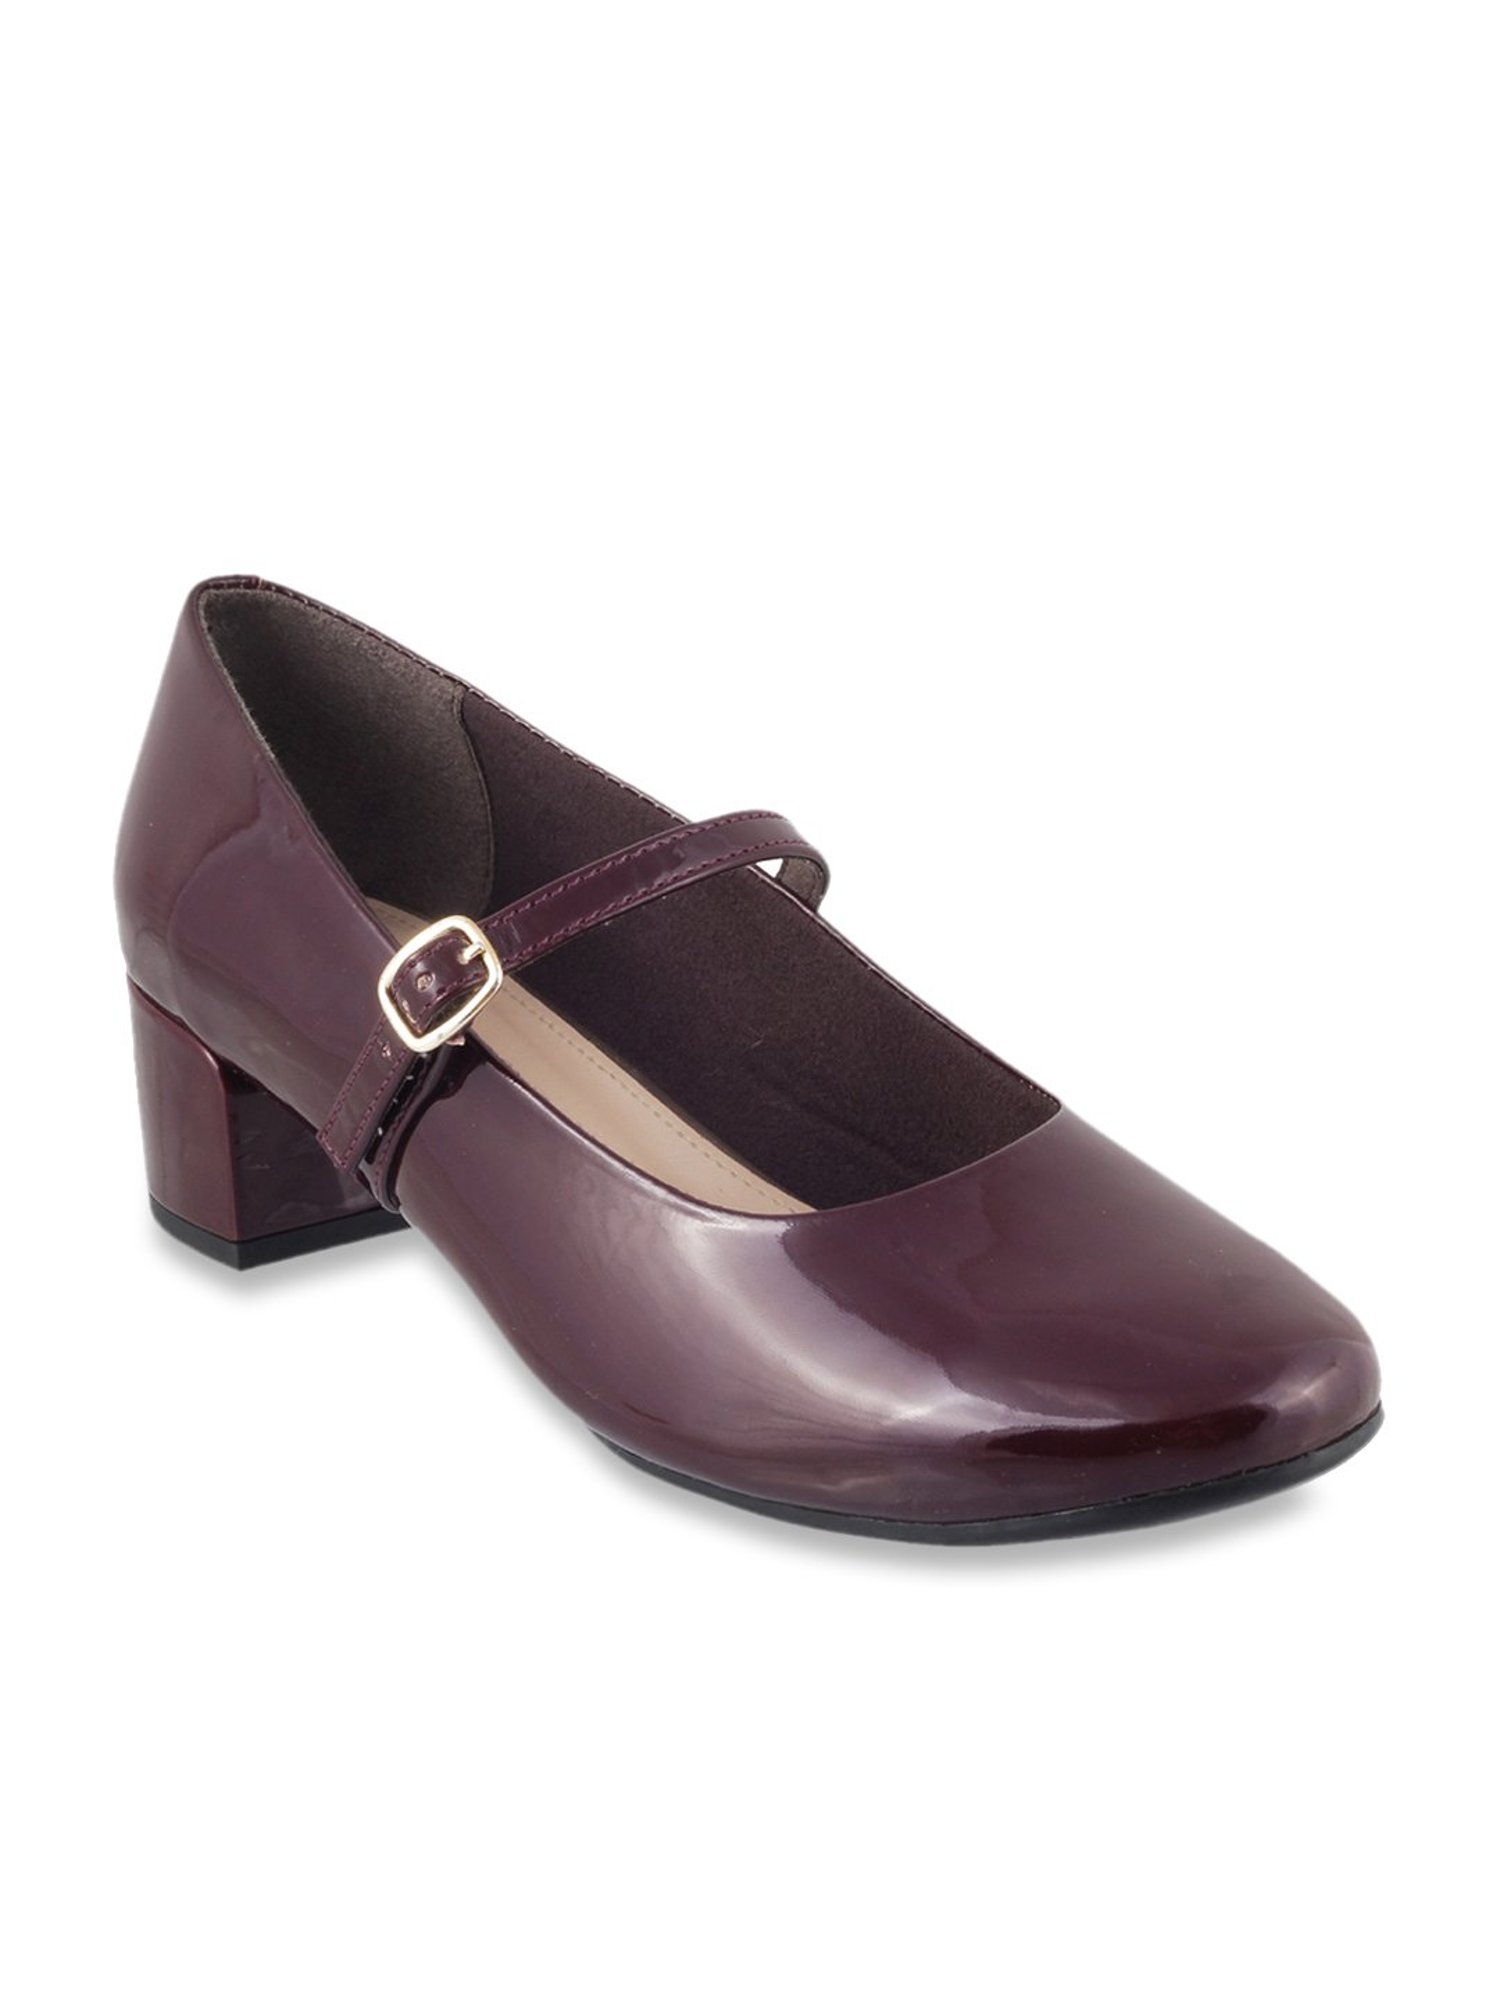 Buy Mochi Maroon Mary Jane Shoes for Women at Best Price @ Tata CLiQ